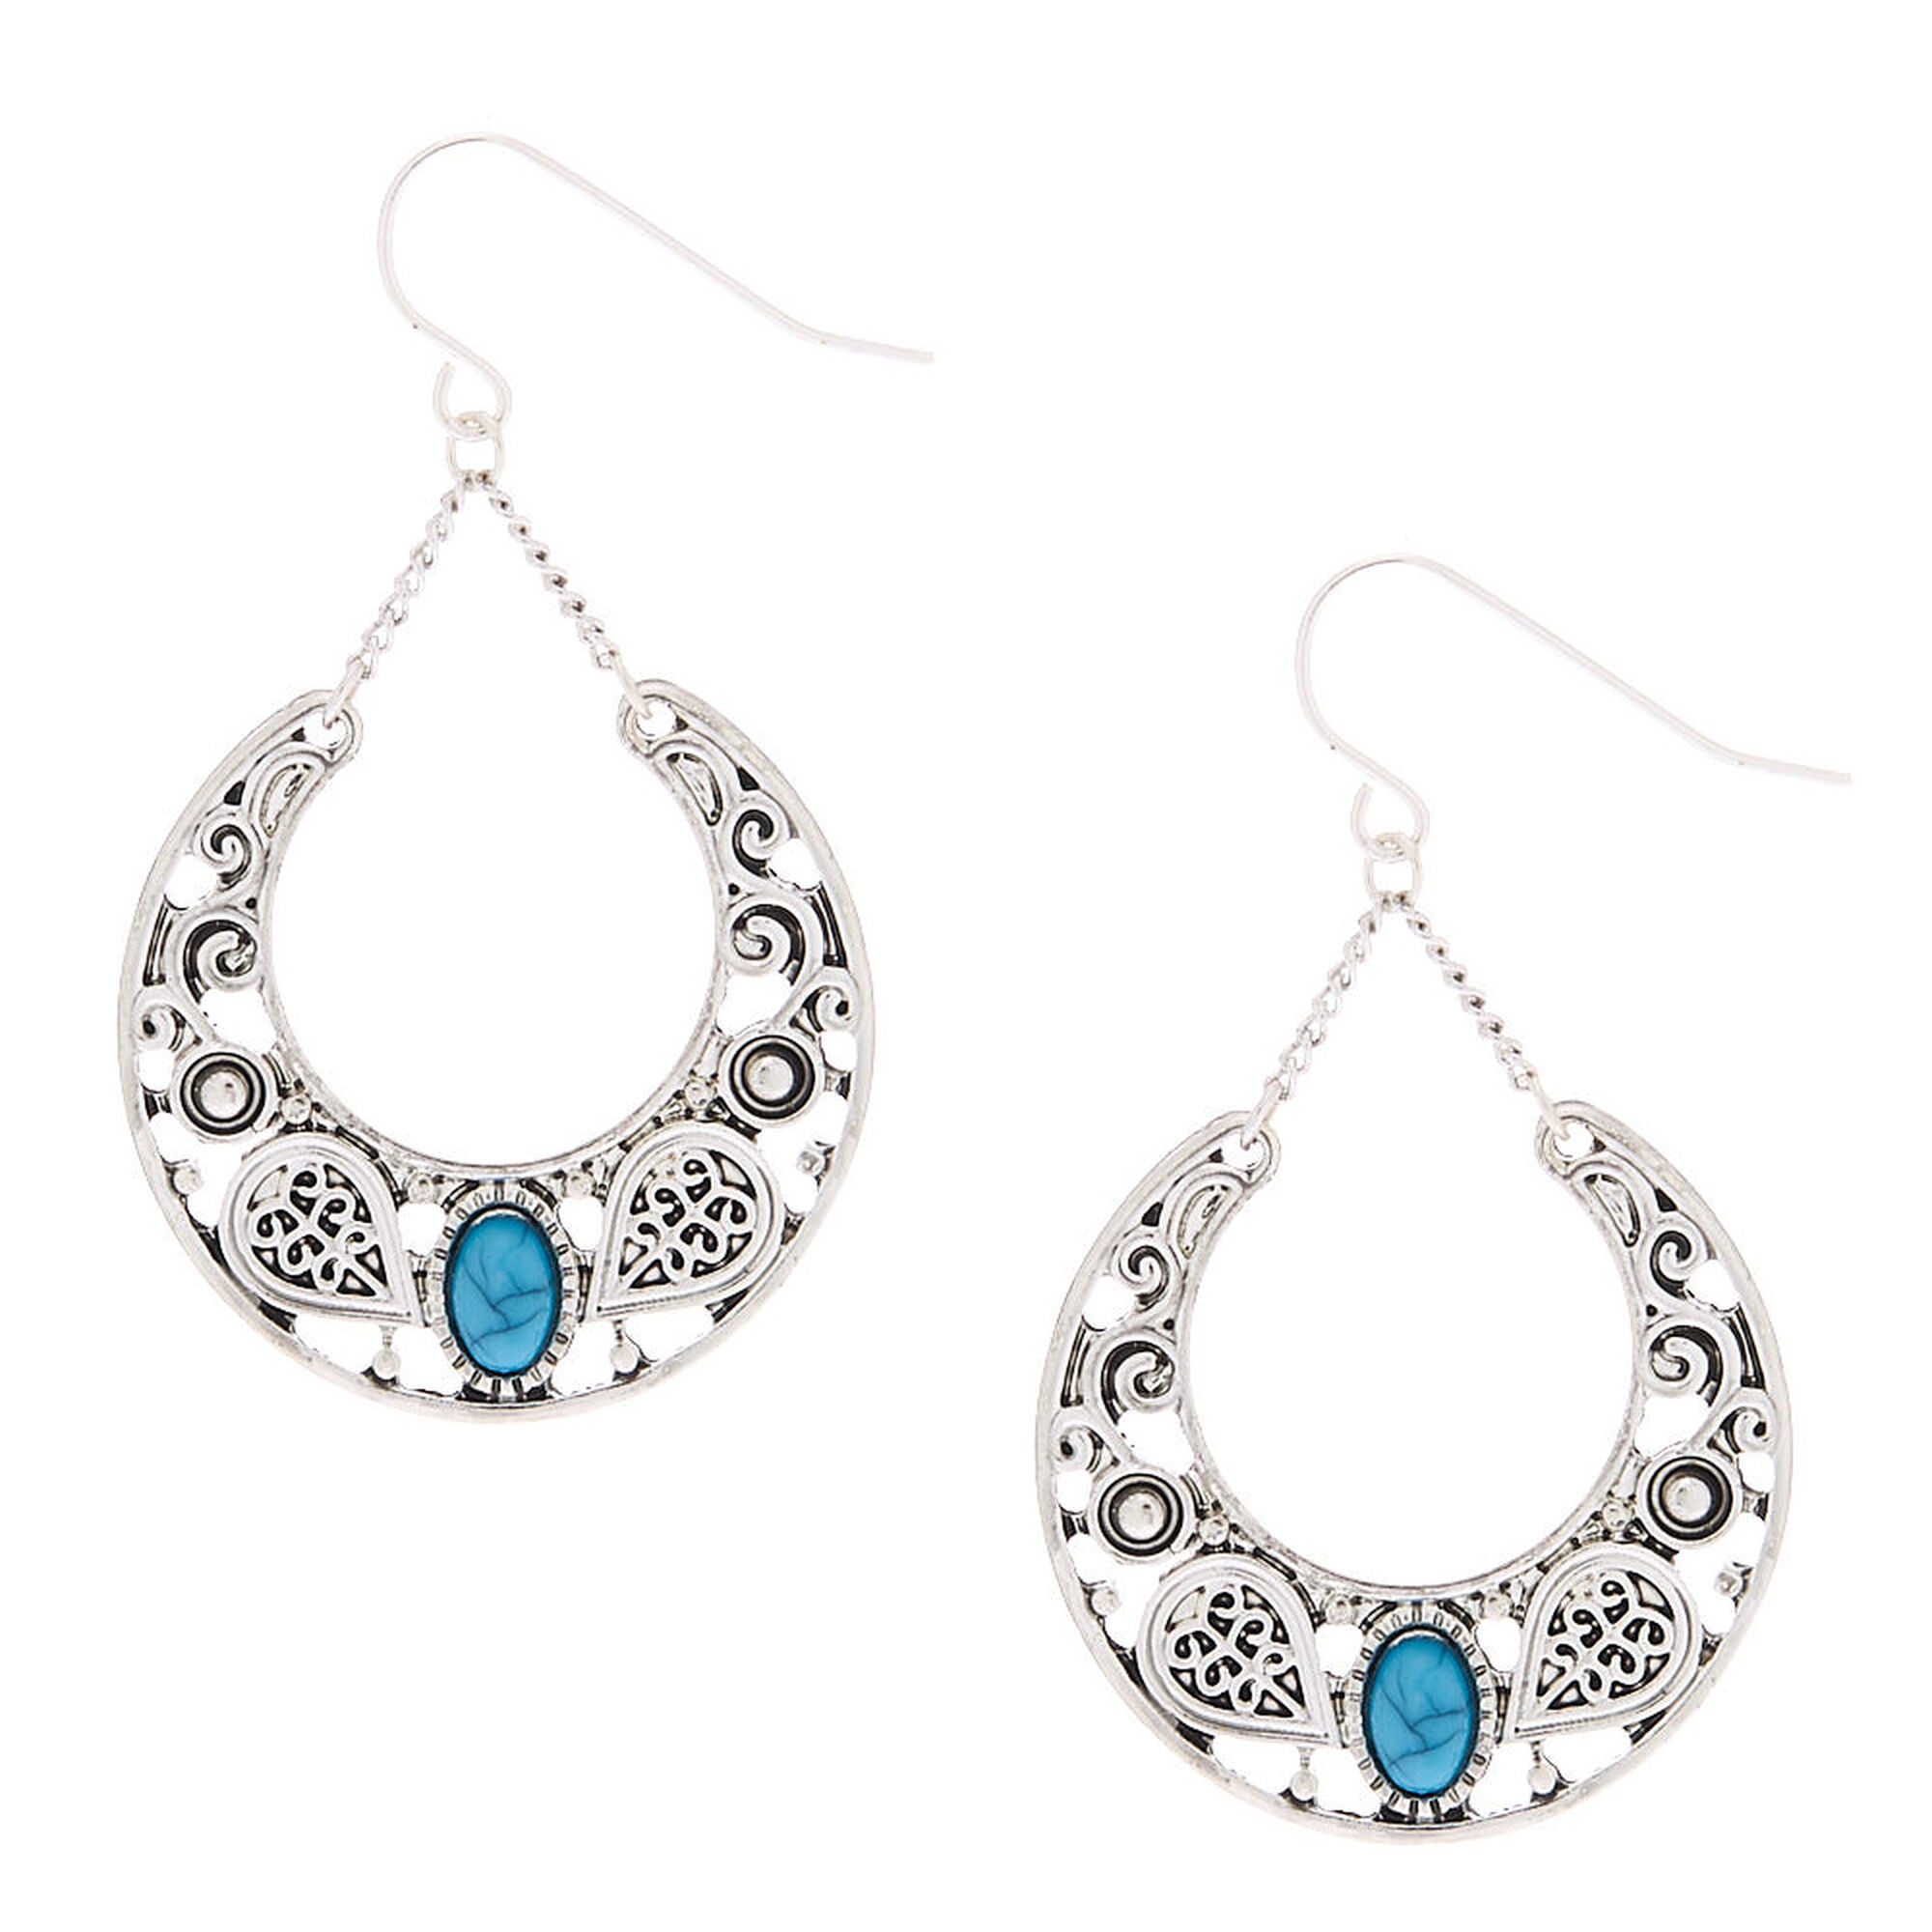 View Claires SilverTone 15 Western Drop Earrings Turquoise information